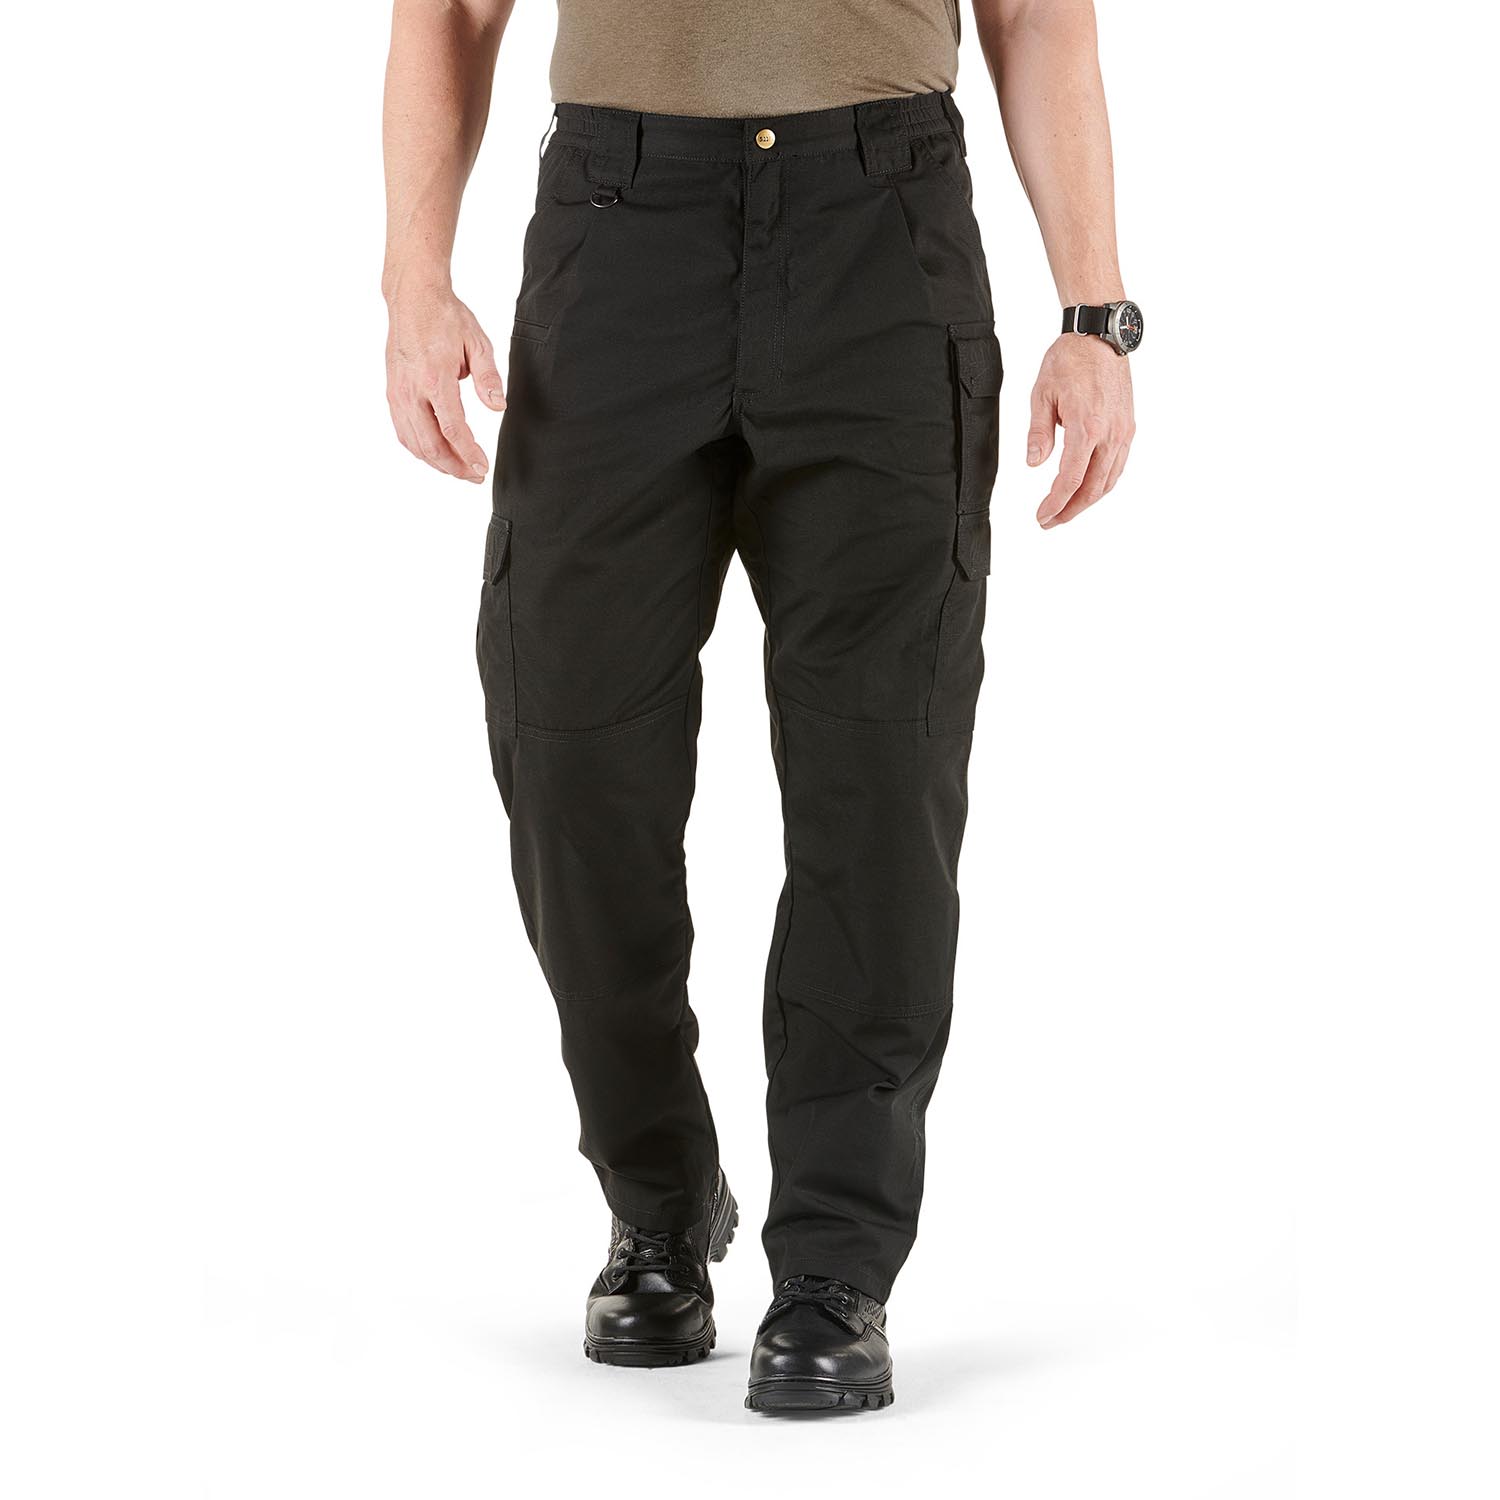 Under Armour Womens Tactical Patrol Pant - UA Loose-Fit Field Duty Cargo  Pants